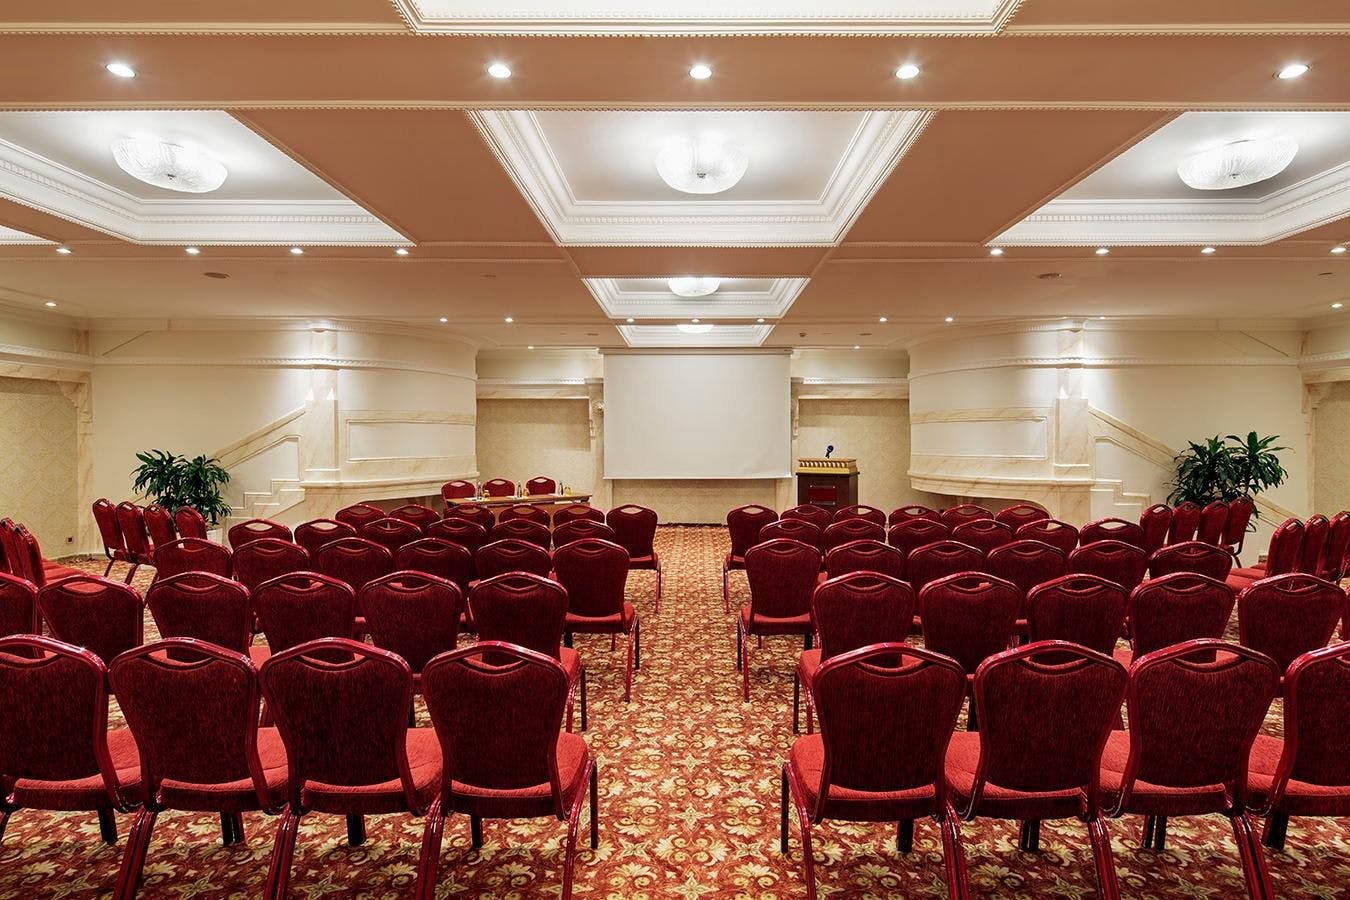 Business Workshops at the Hotel Conference Room